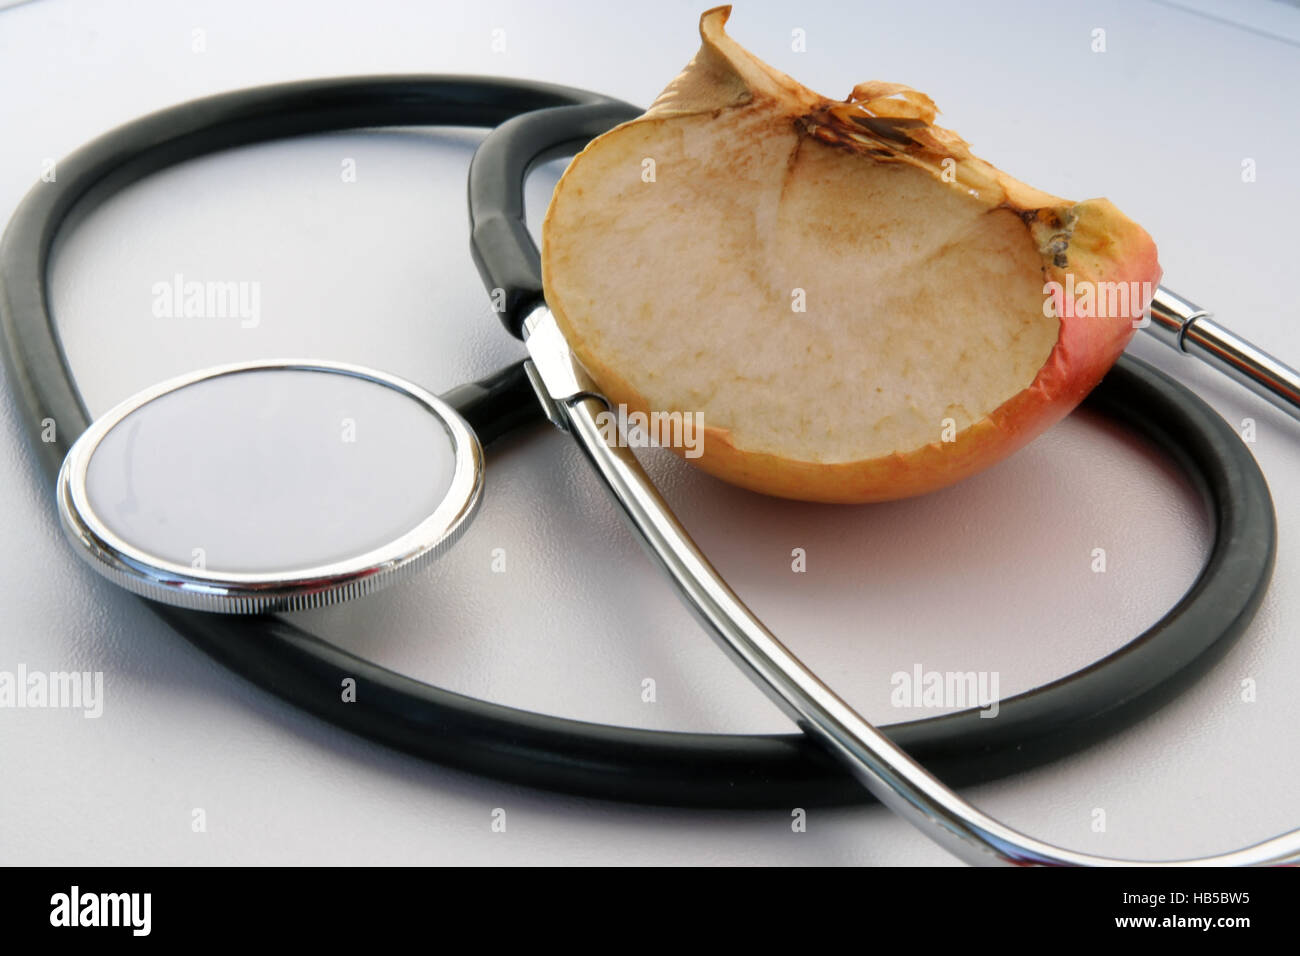 Medical tools. Medical stethoscope and a apple. Stock Photo